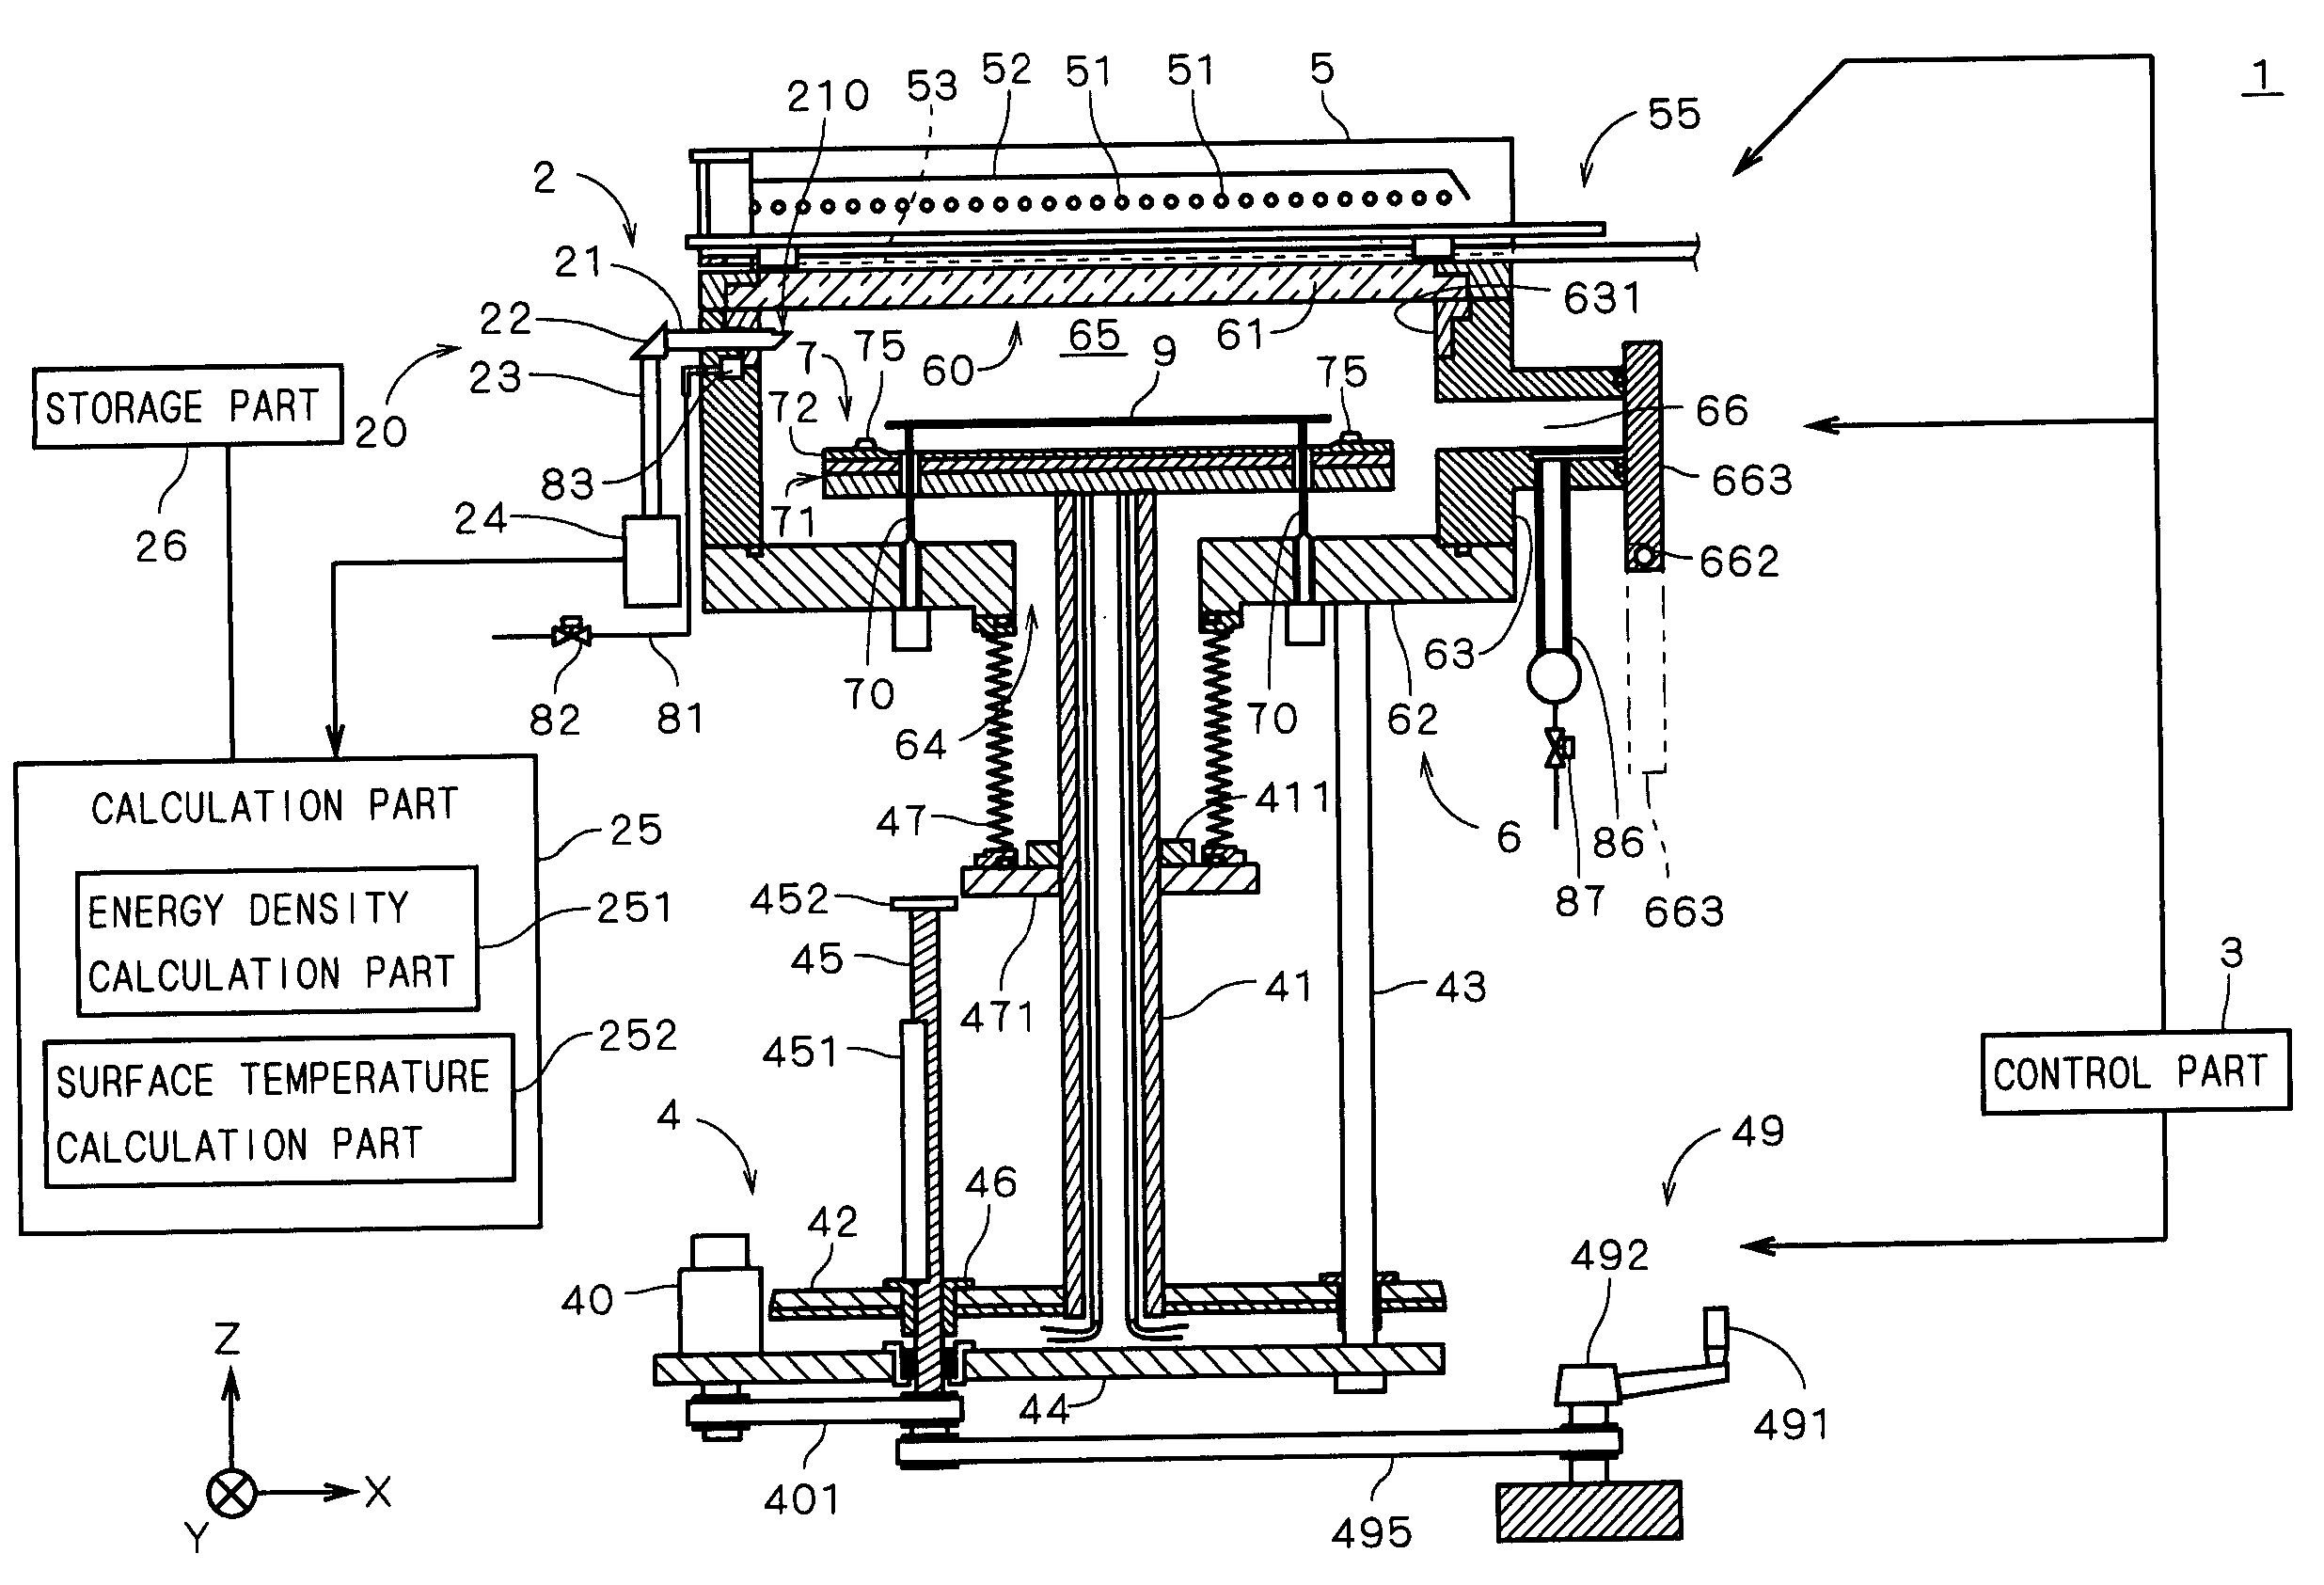 Apparatus and method for thermal processing of substrate